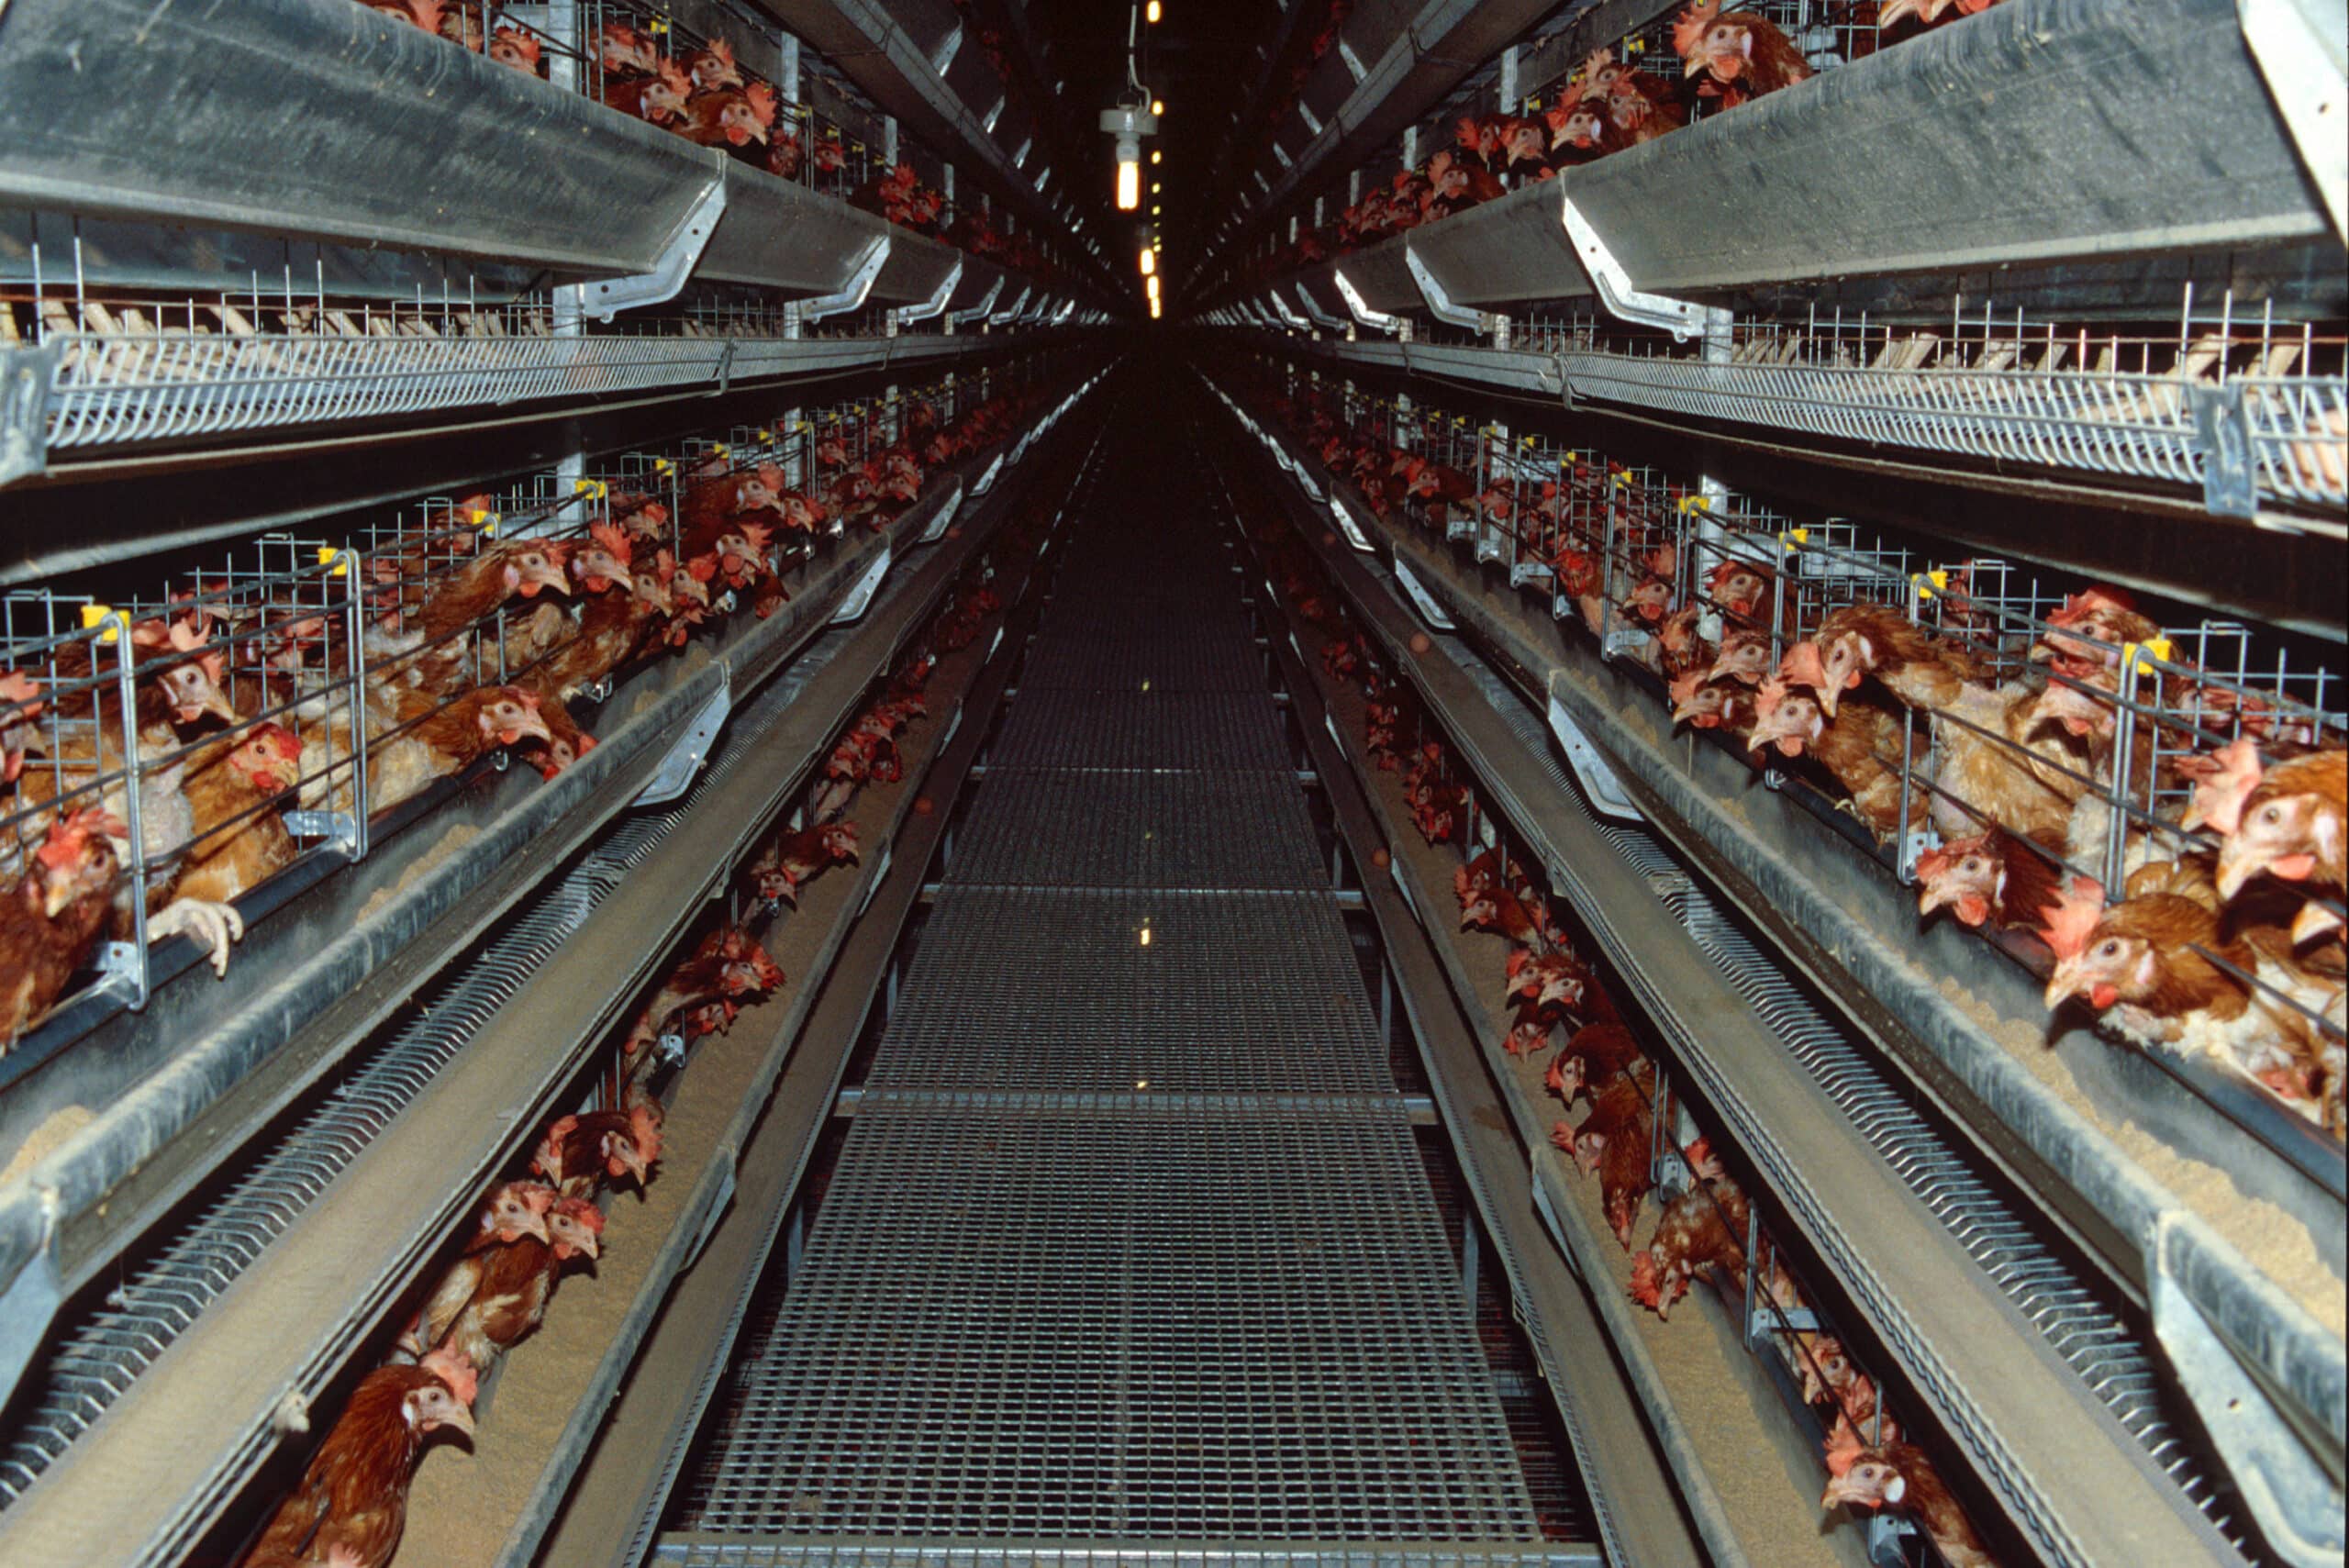 Why eggs-actly are millions of Aussie hens still caged, and how can we help them?